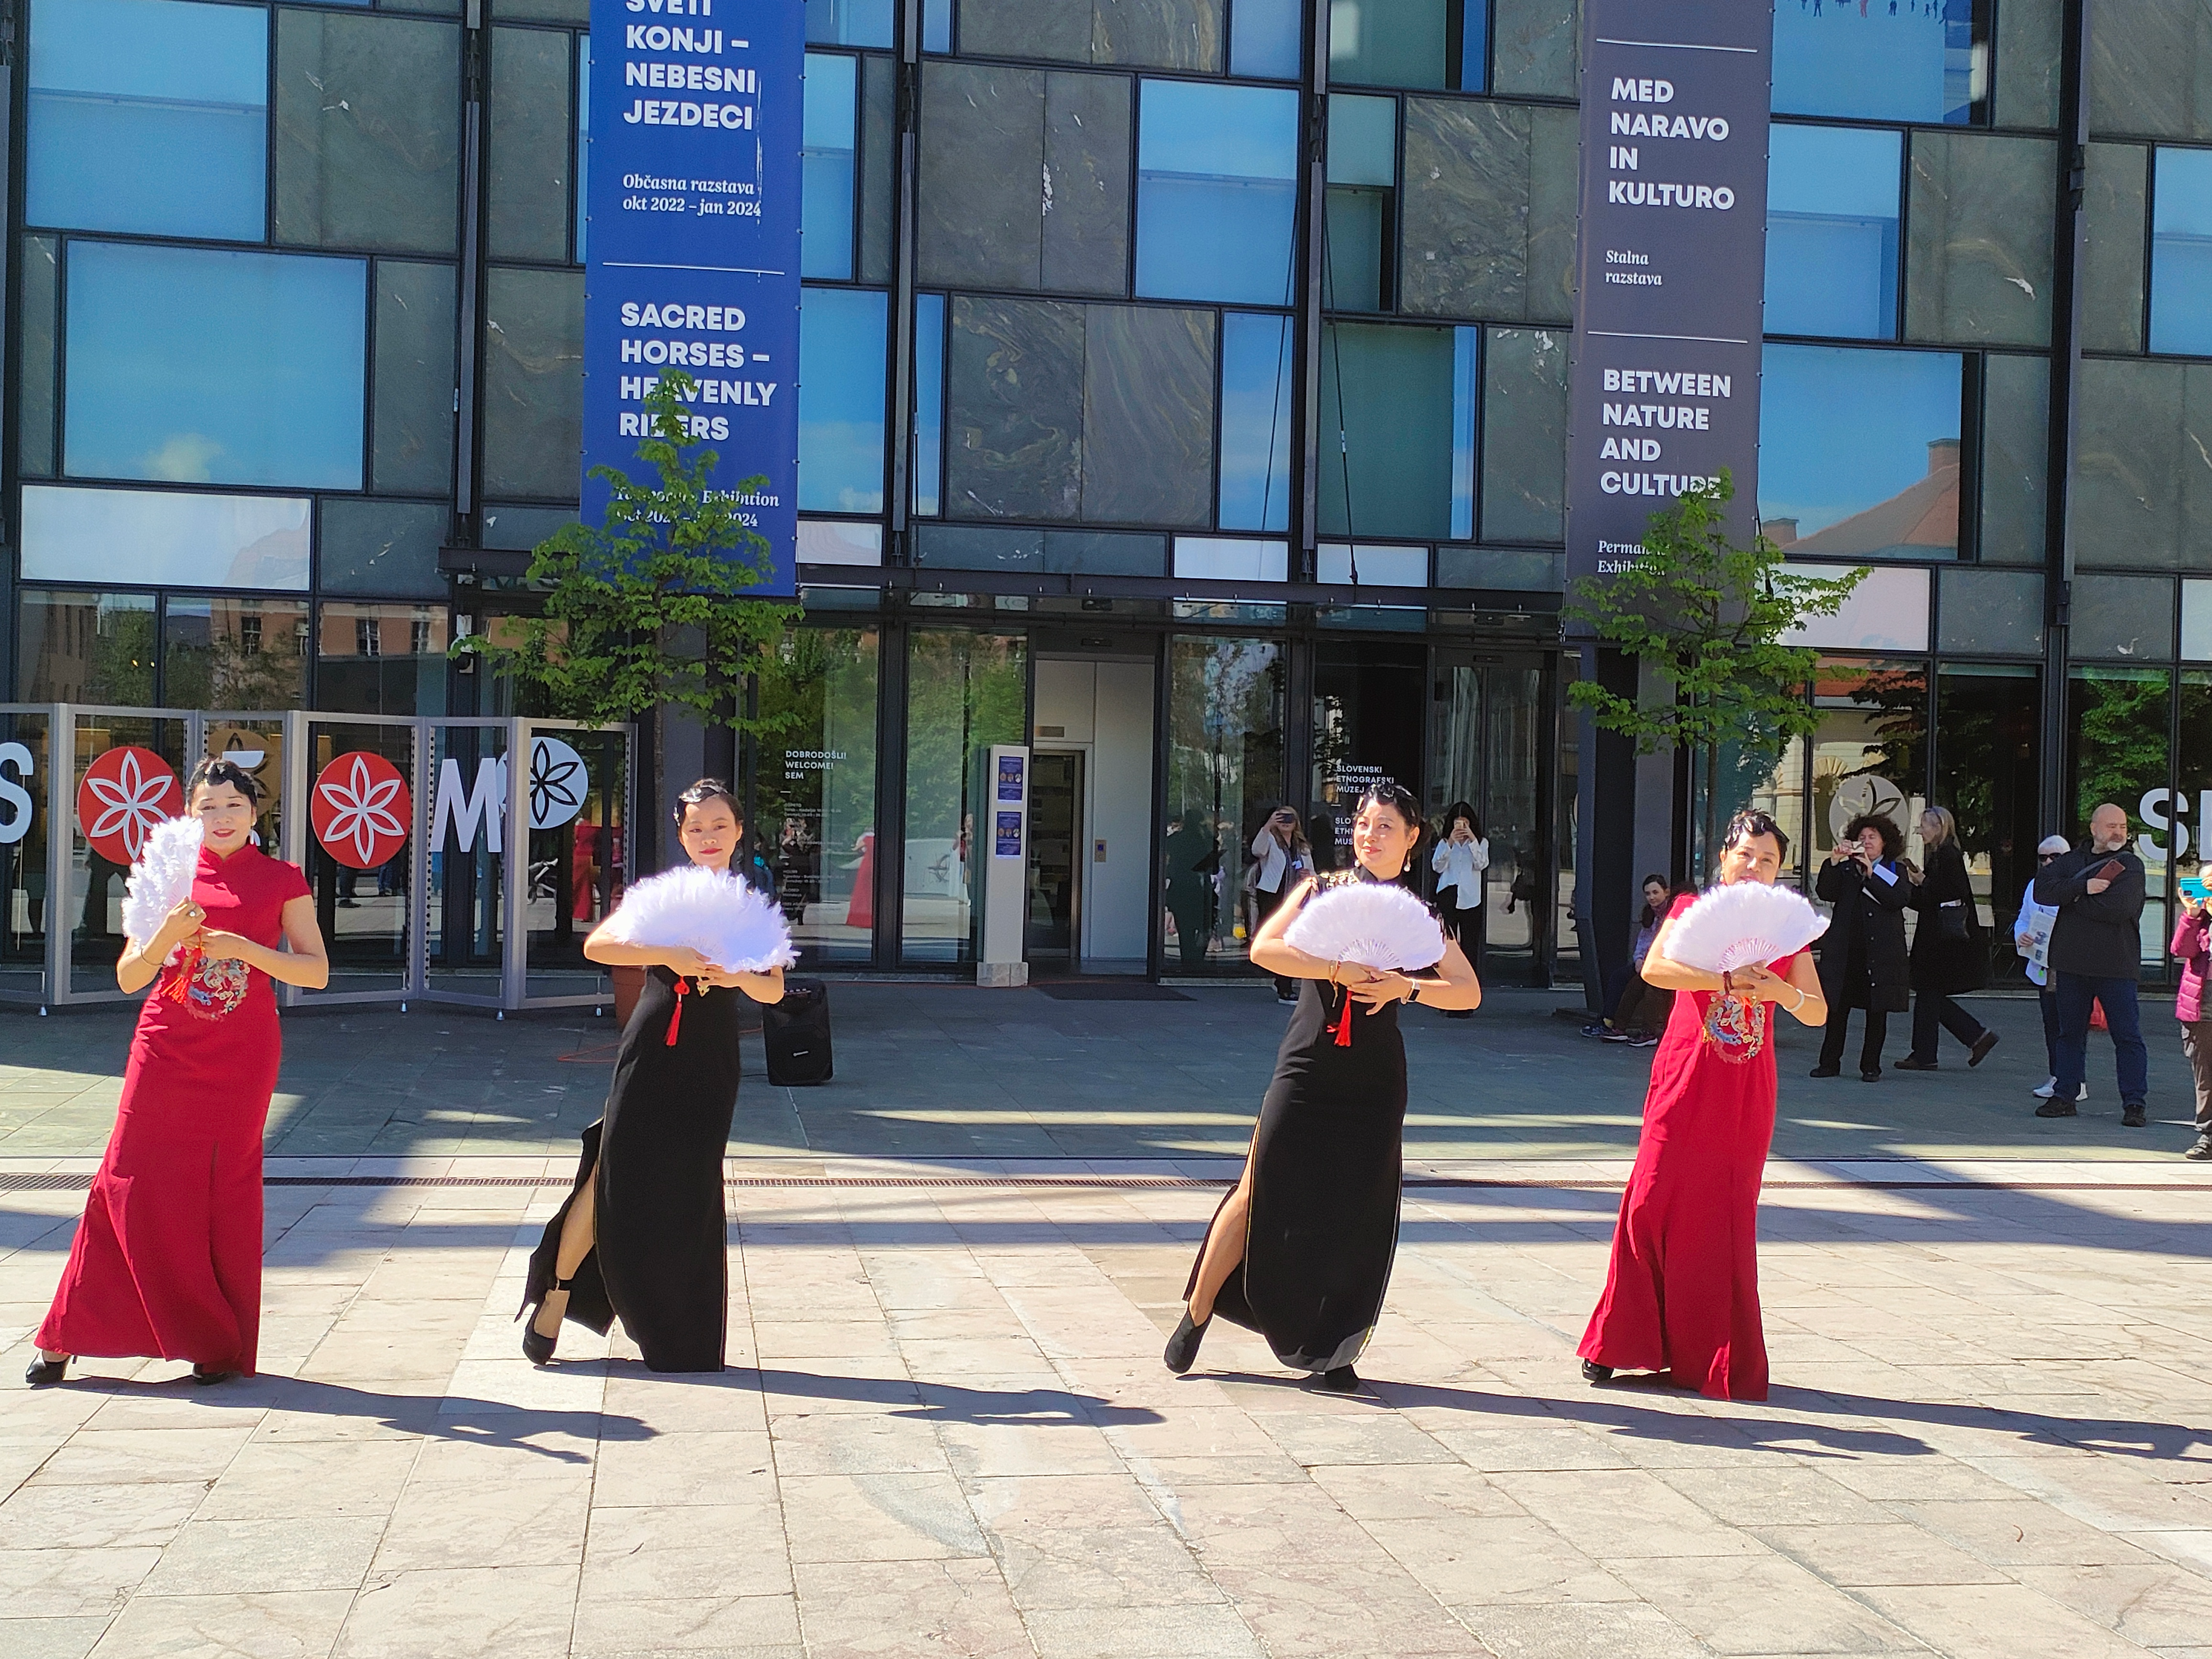 The Confucius Institute in Ljubljana held the “United Nations Chinese Day” event